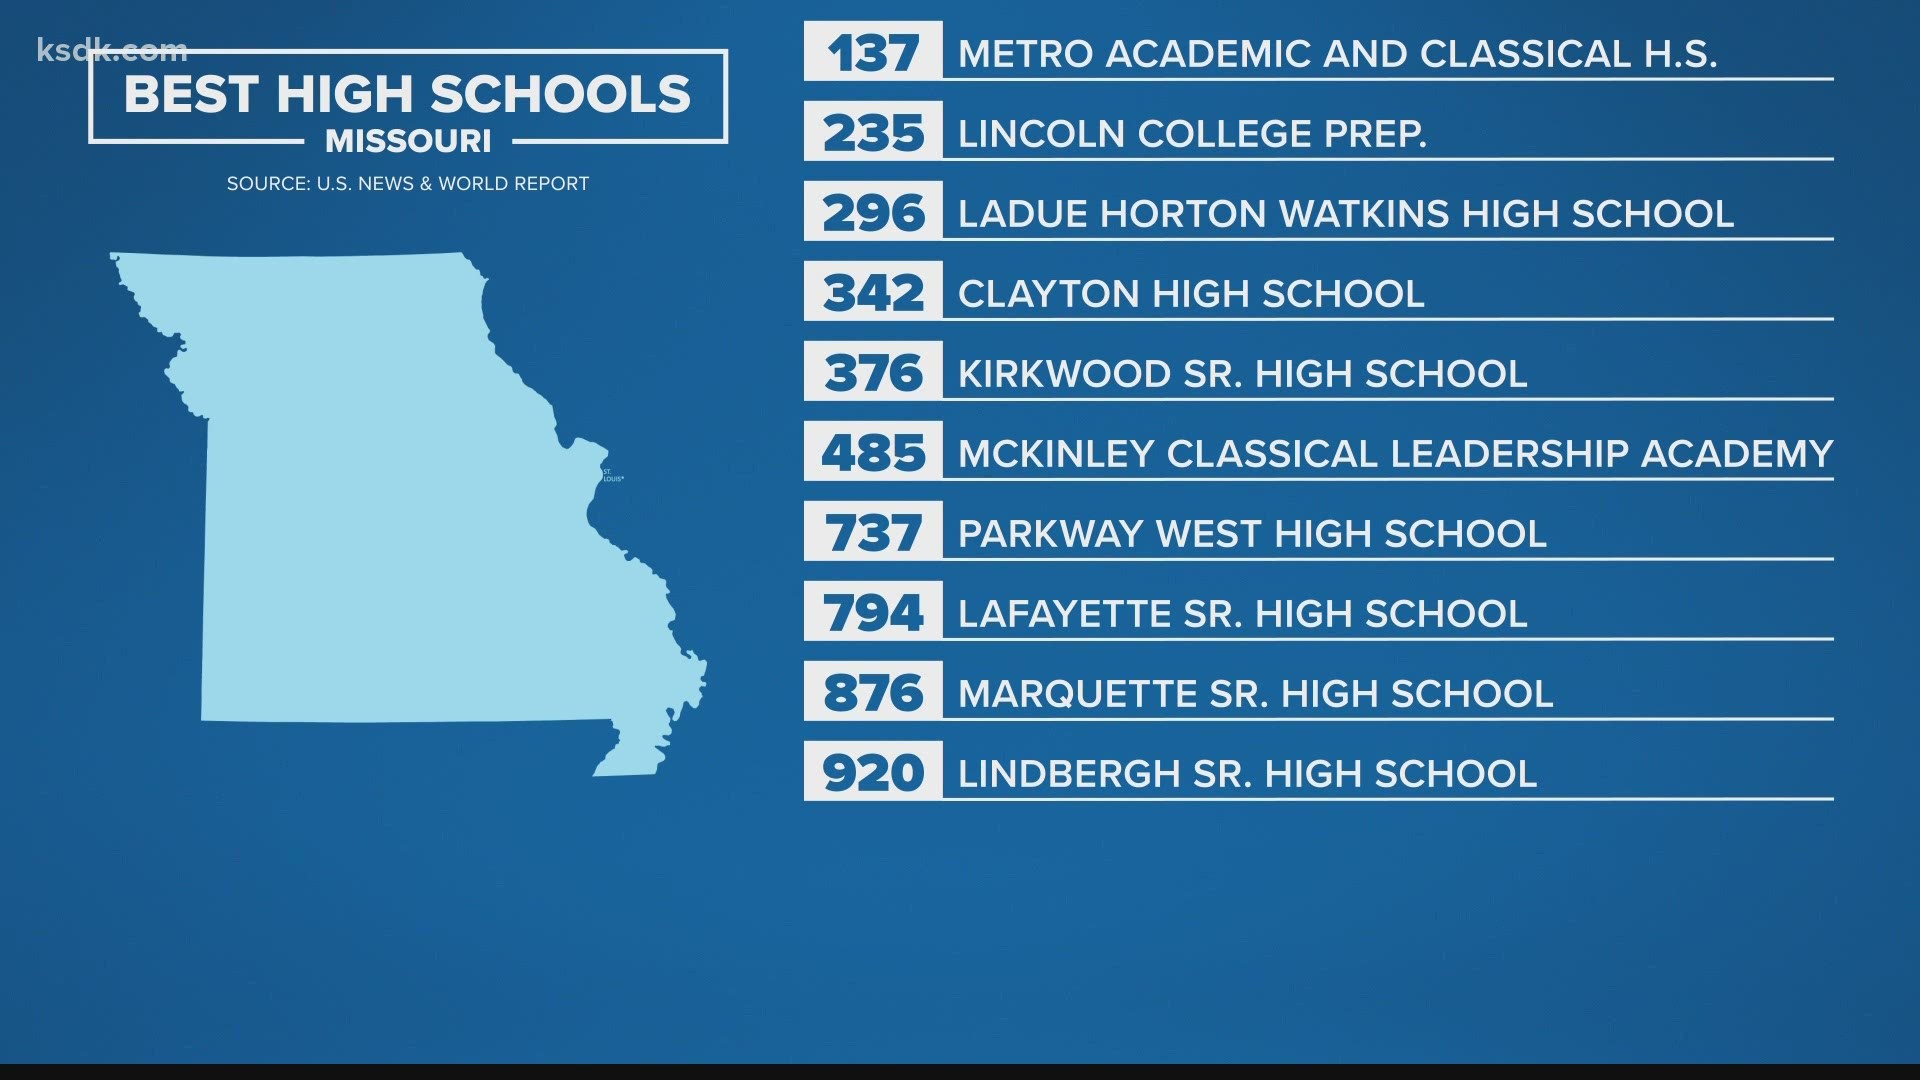 St. Louis is home to nine of the 10 best public high schools in the state, according to the 2021 list from U.S. News & World Report